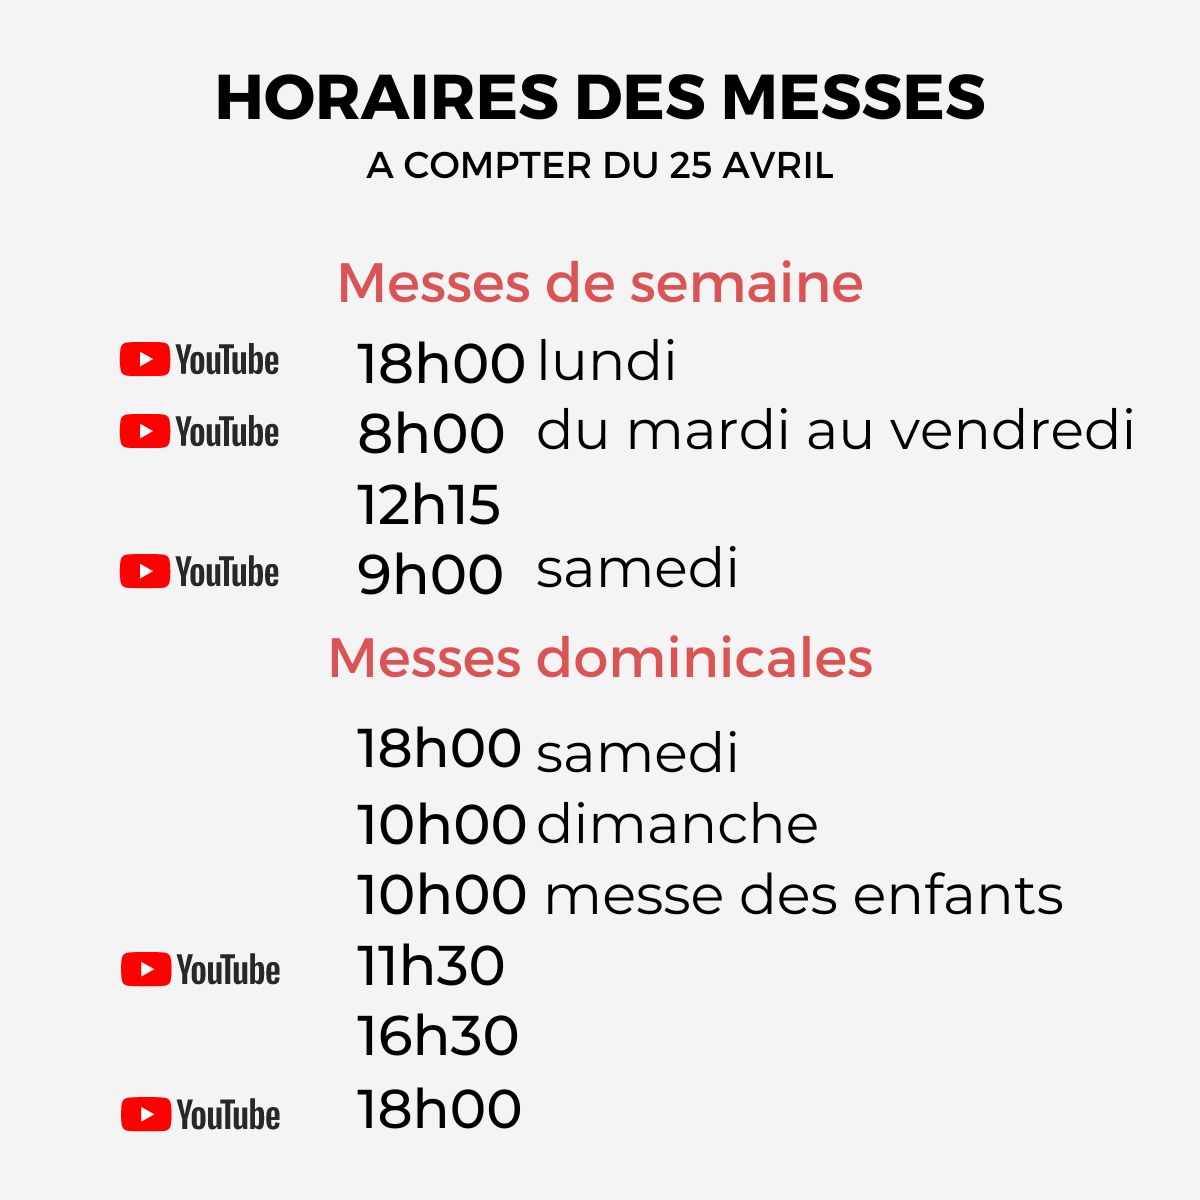 Horaires 25 avril 2021